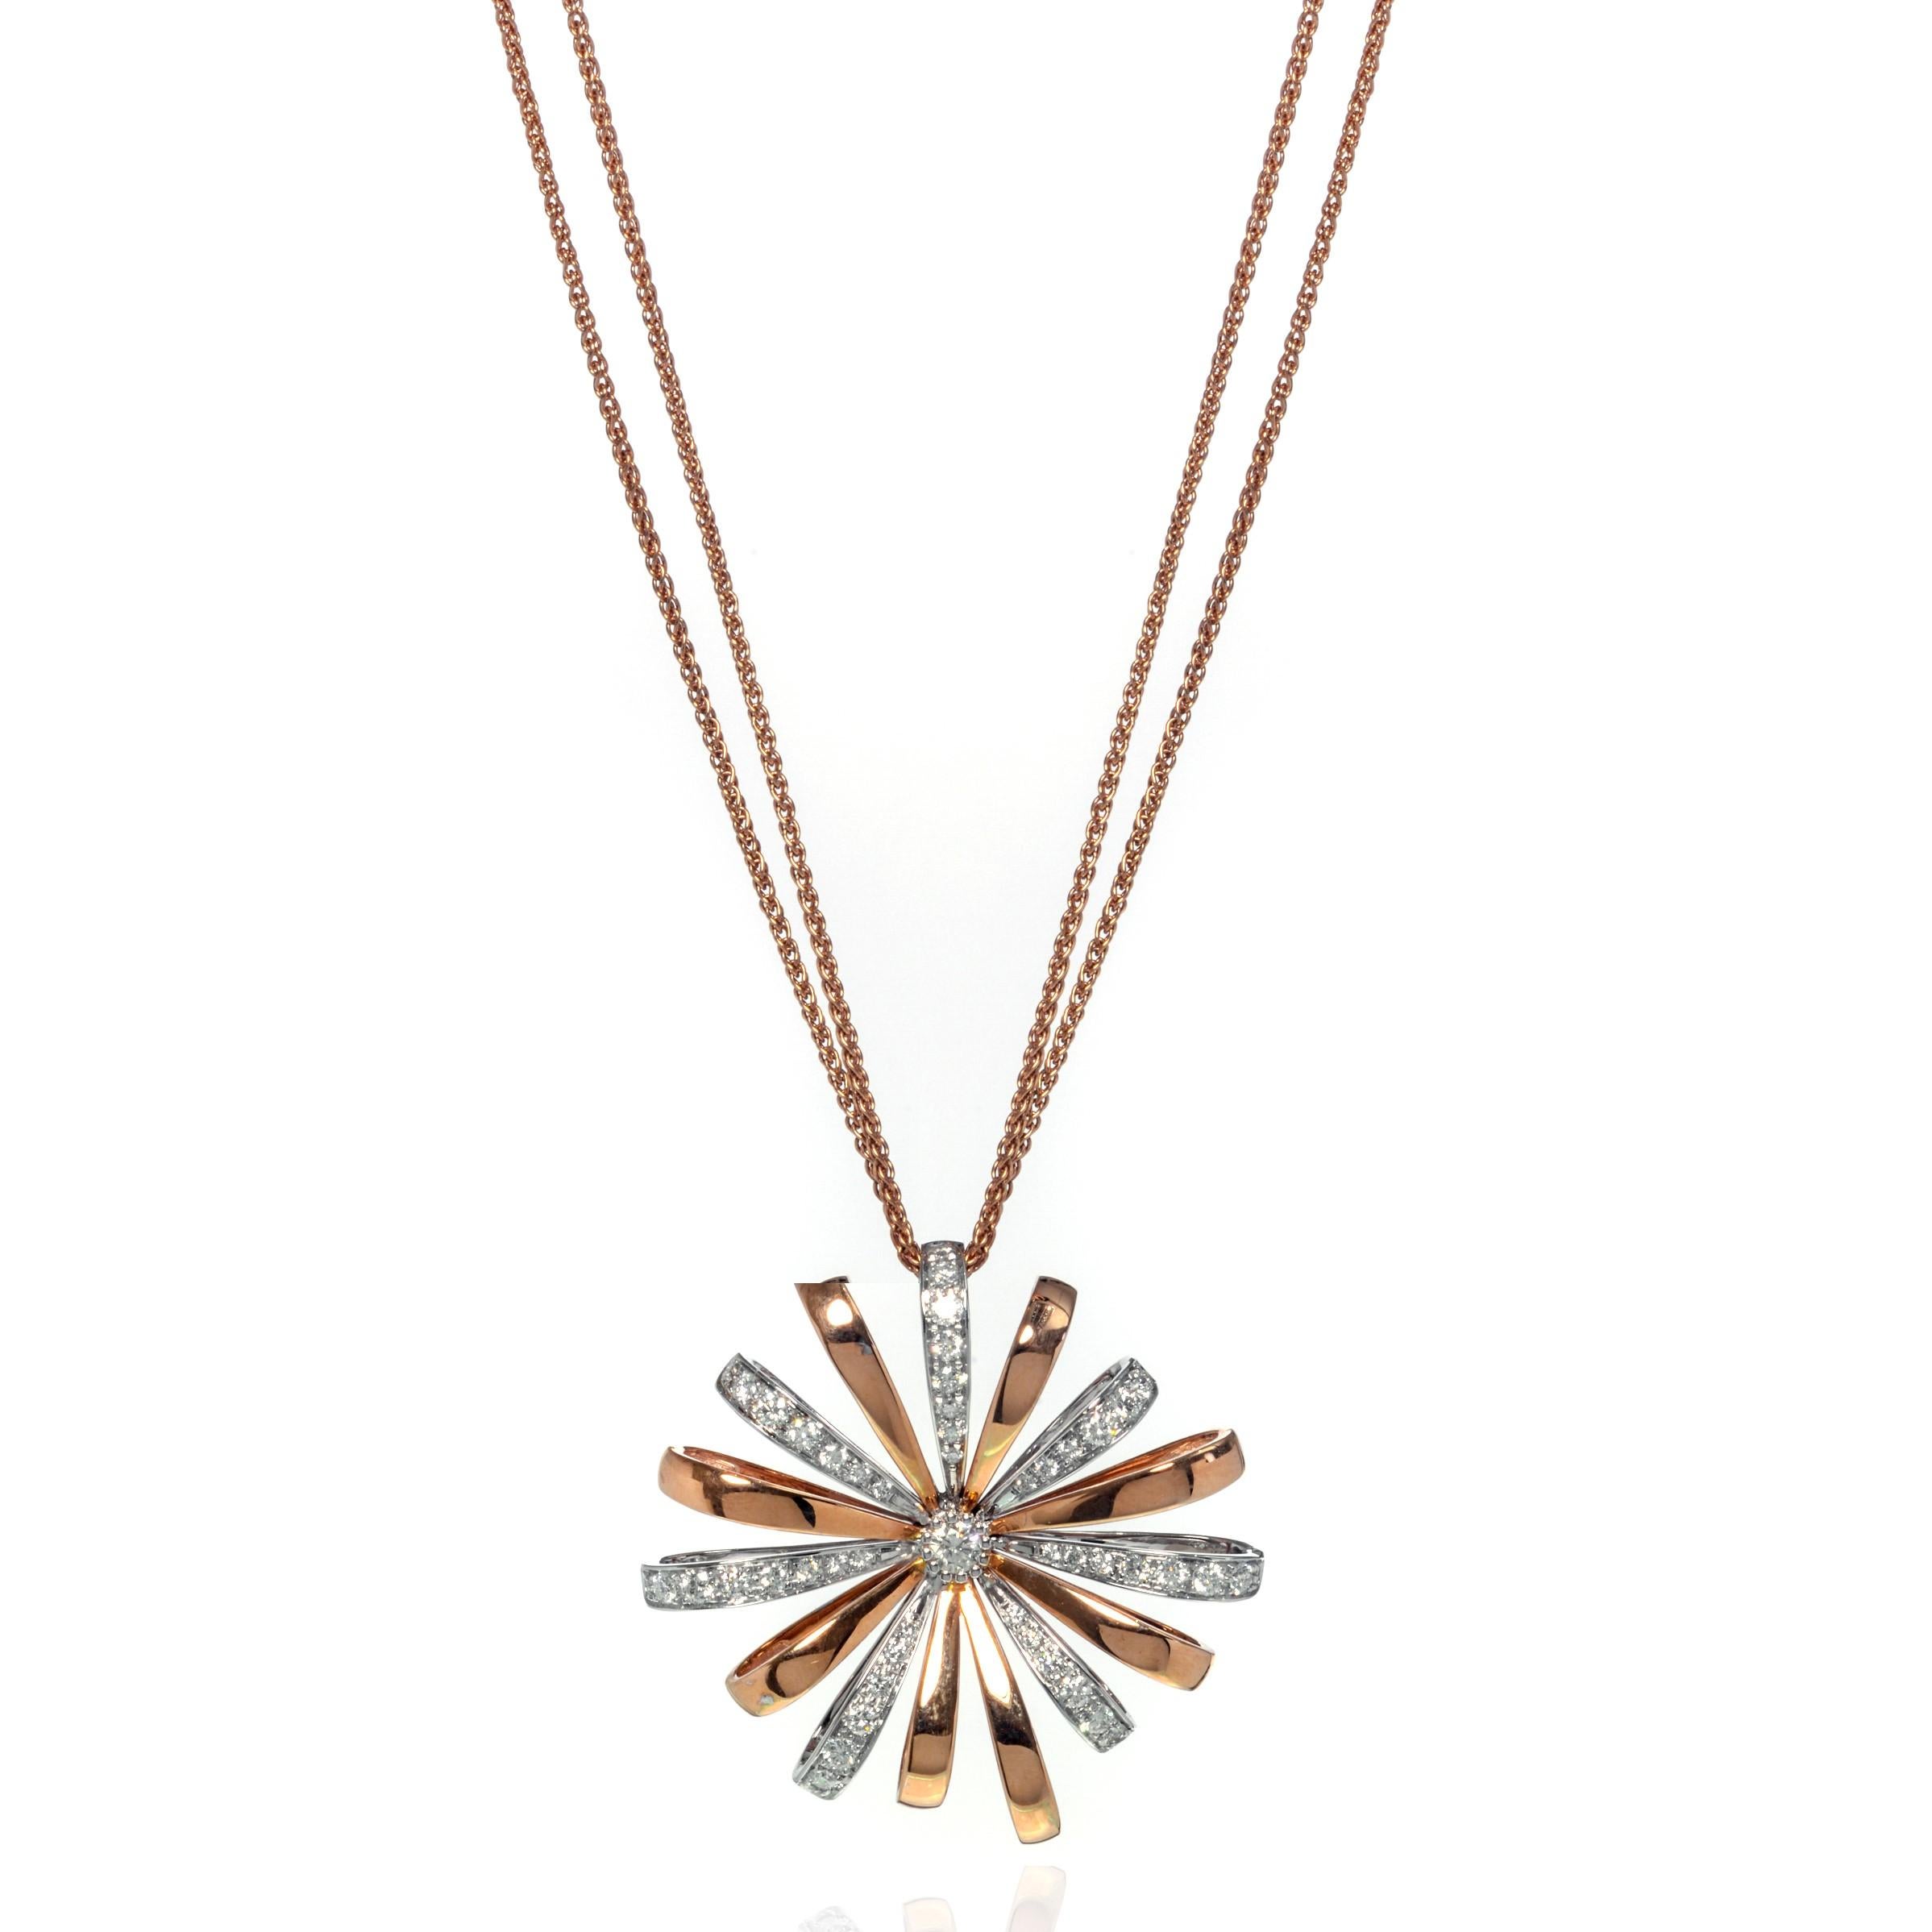 Beautiful Luca Carati large diamond flower pendant long necklace crafted in 18k rose and white gold. This piece features a gorgeous display of brilliant pave set diamonds weighing 1.28cts. Diamond color G and VVS-VS clarity. Chain length: 30 inches.